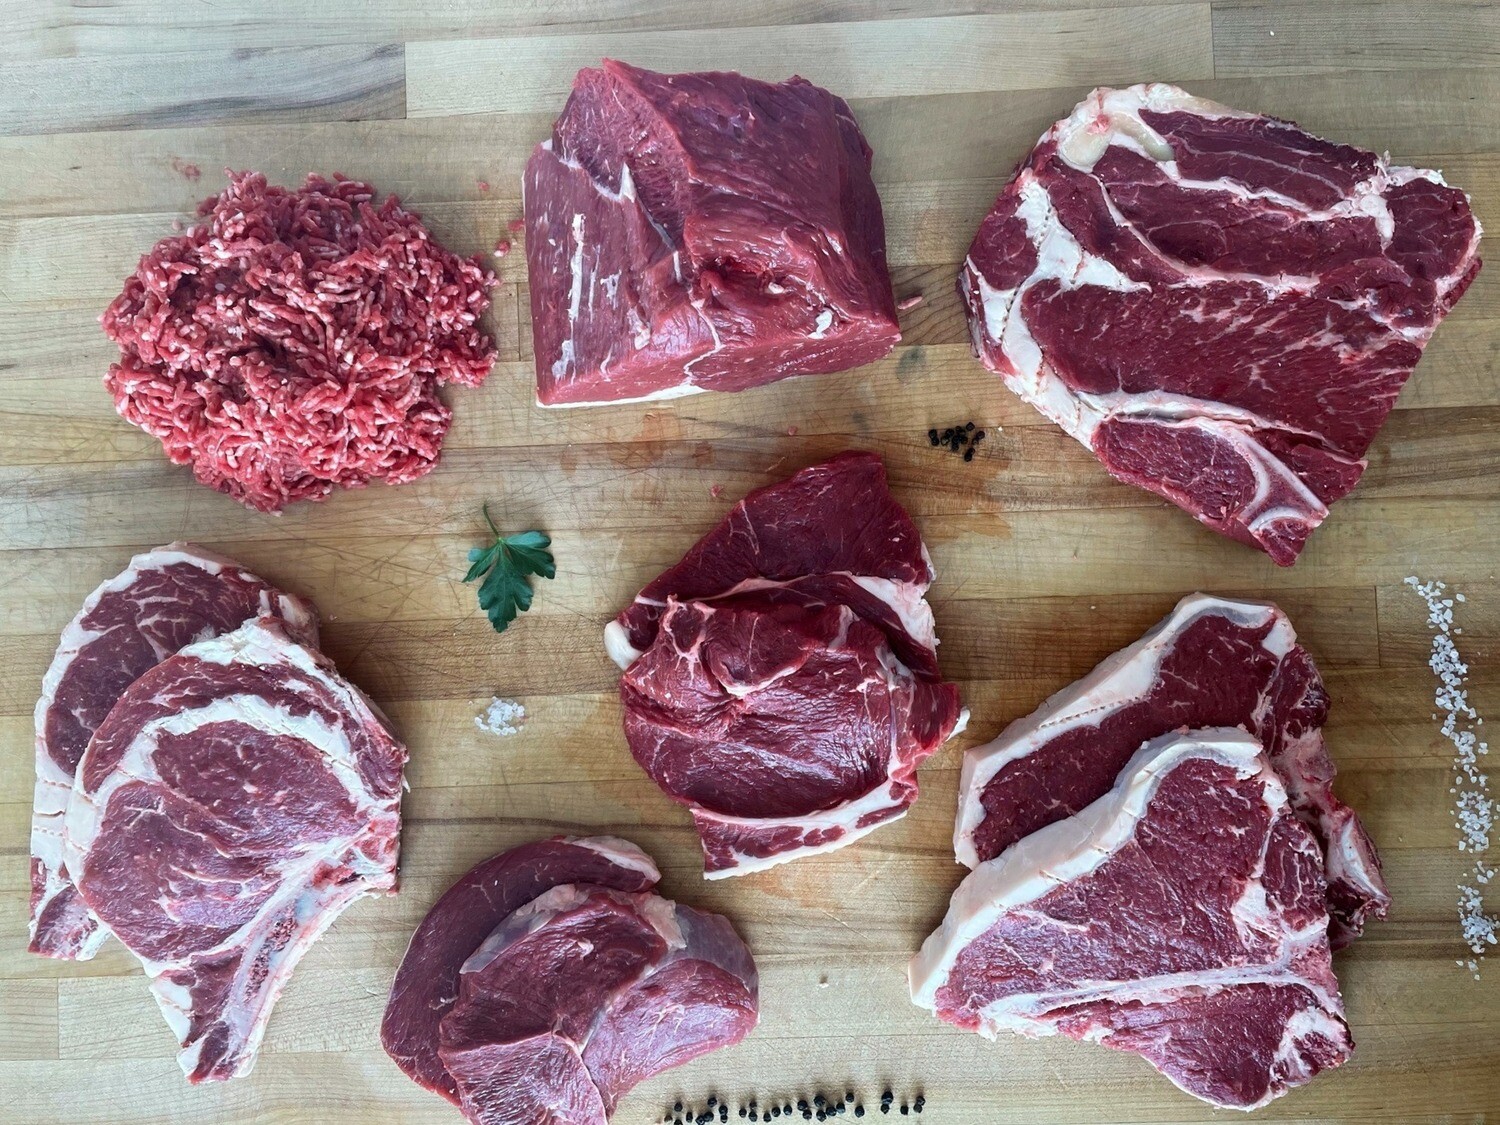 BEEF COMBO BOX - Approx. $250-$270